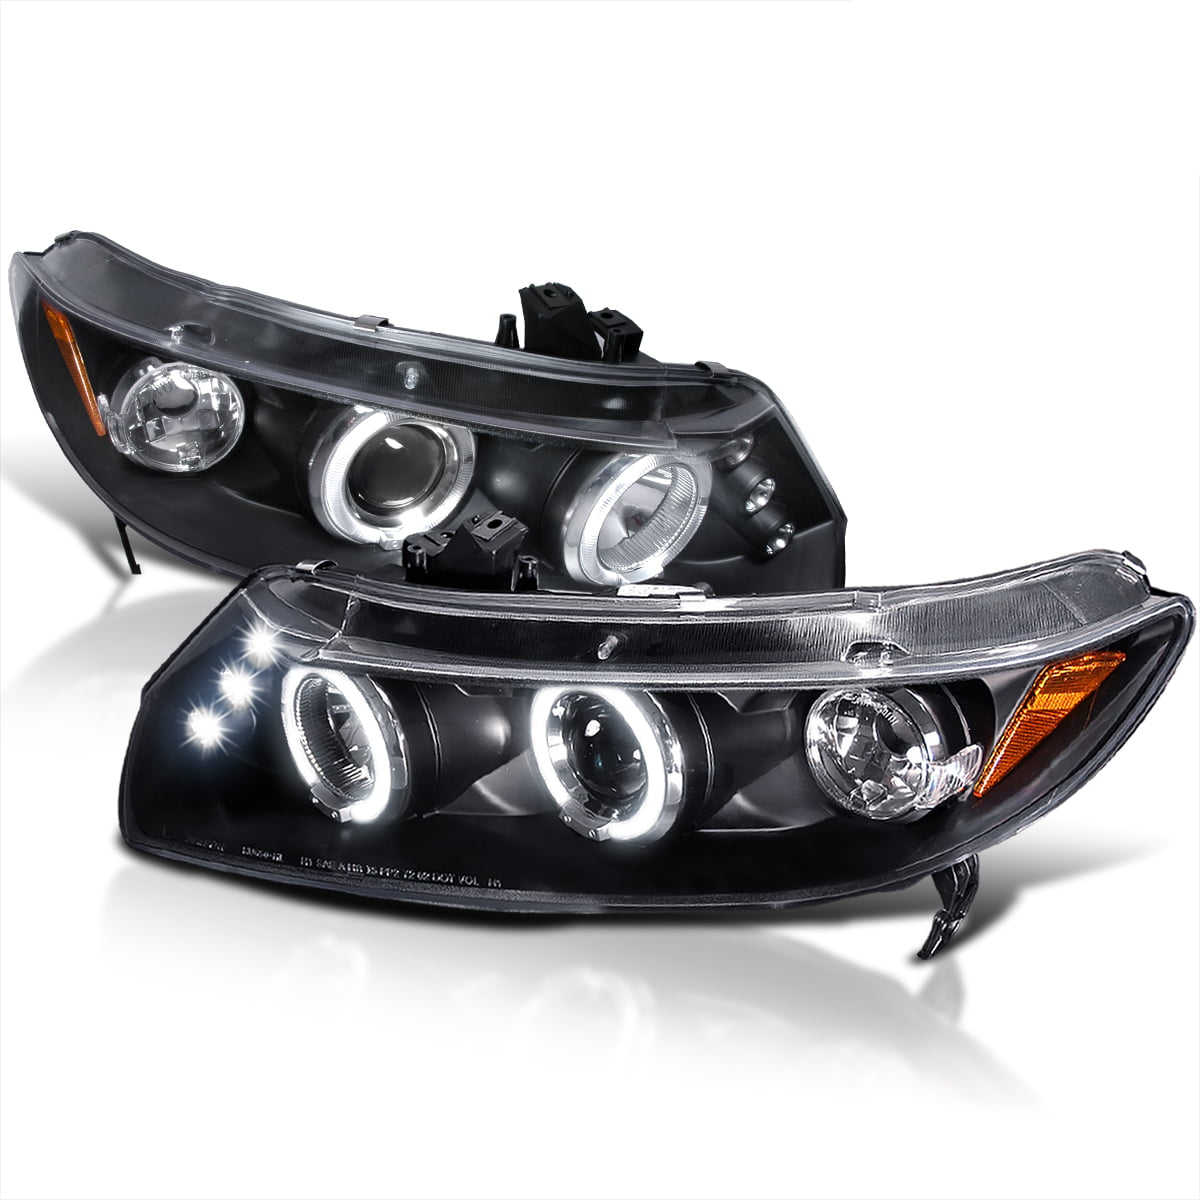 Spec-D Tuning Led Projector Headlights Black Compatible with Honda Civic  Coupe 2Dr 2006-2011 L+R Pair Head Light Lamp Assembly - Walmart.com